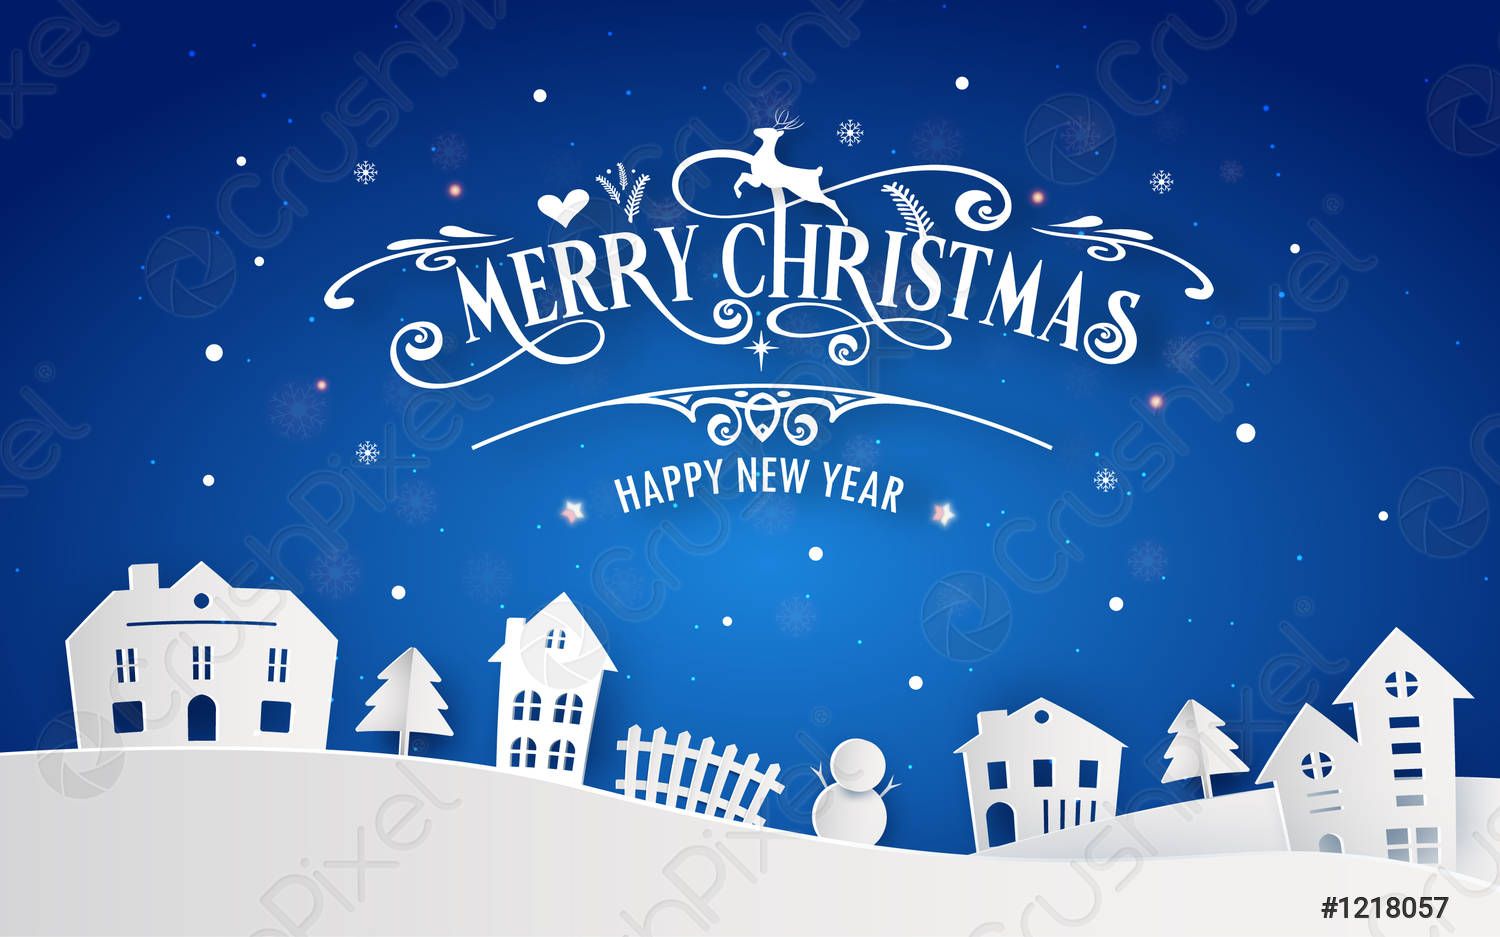 Merry Christmas And Happy New Year Of Snowy Home Town, Stock Vector